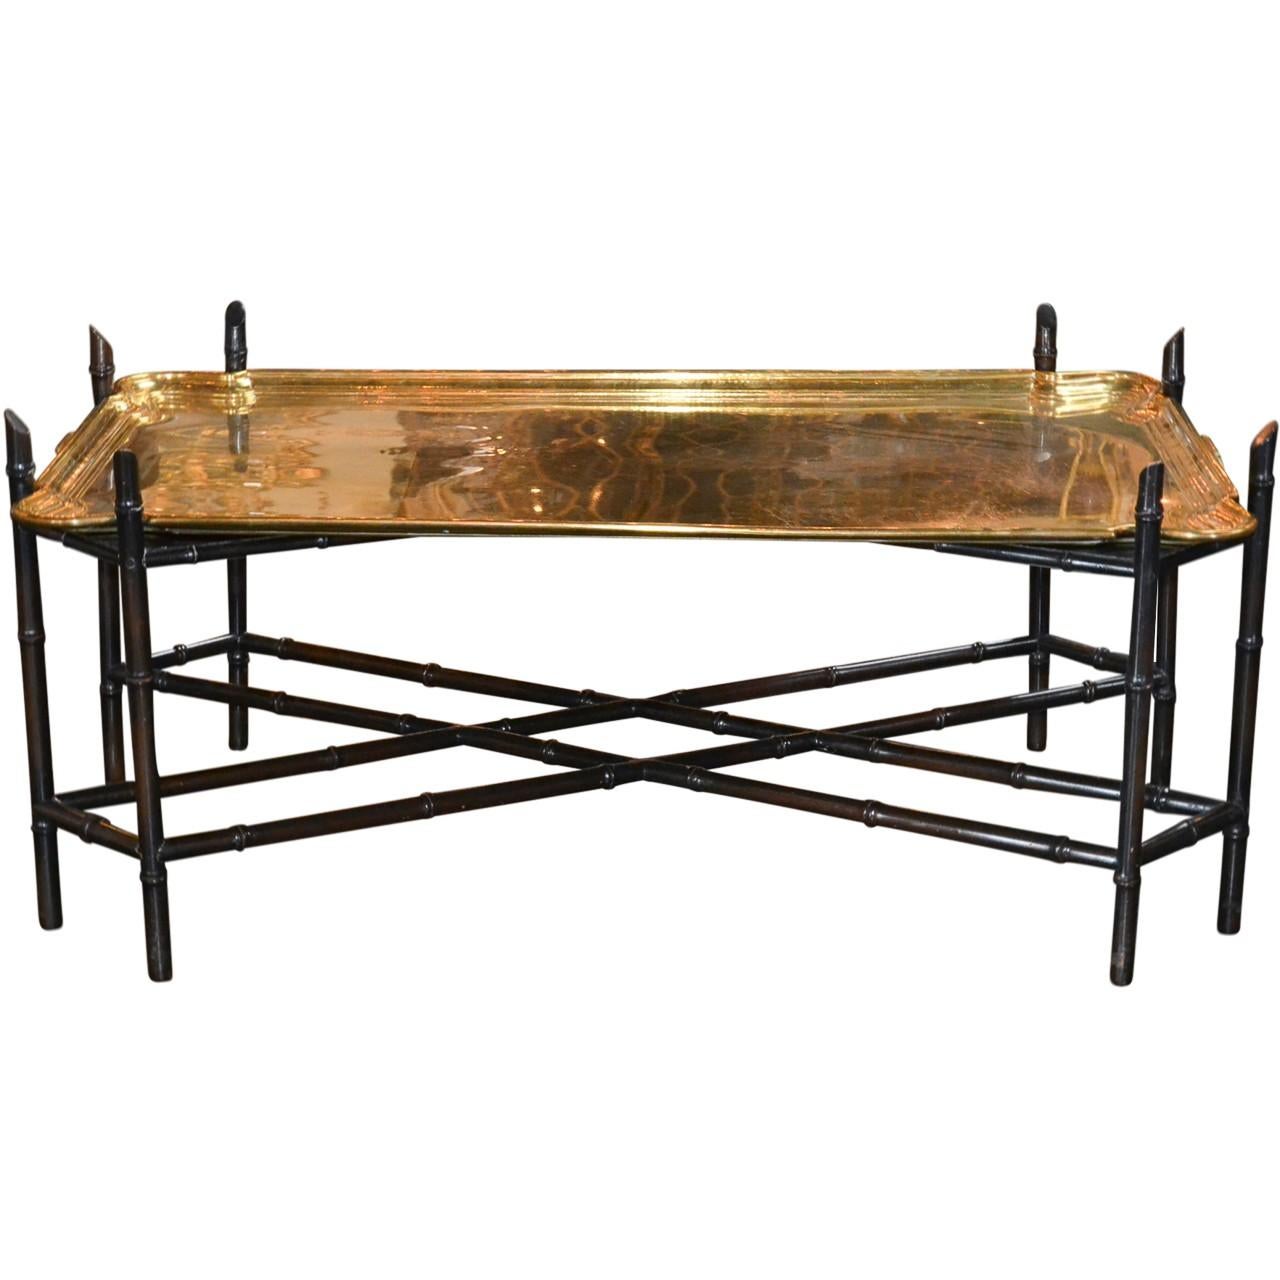 Midcentury Black Lacquered and Brass Coffee Table